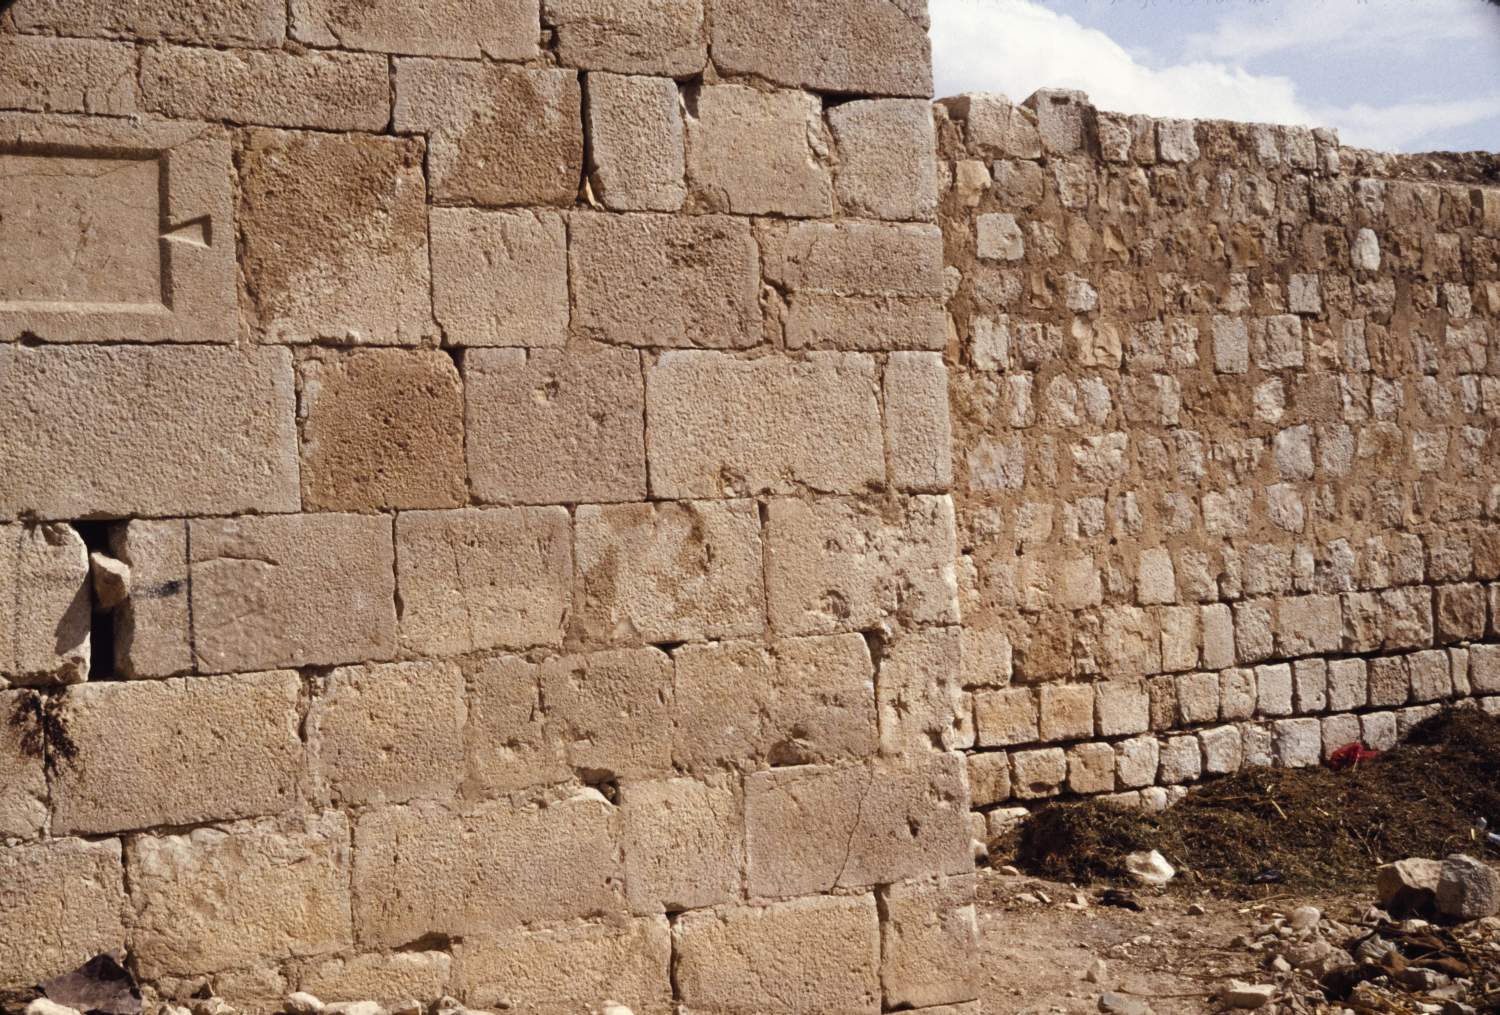 View of exterior wall detail.